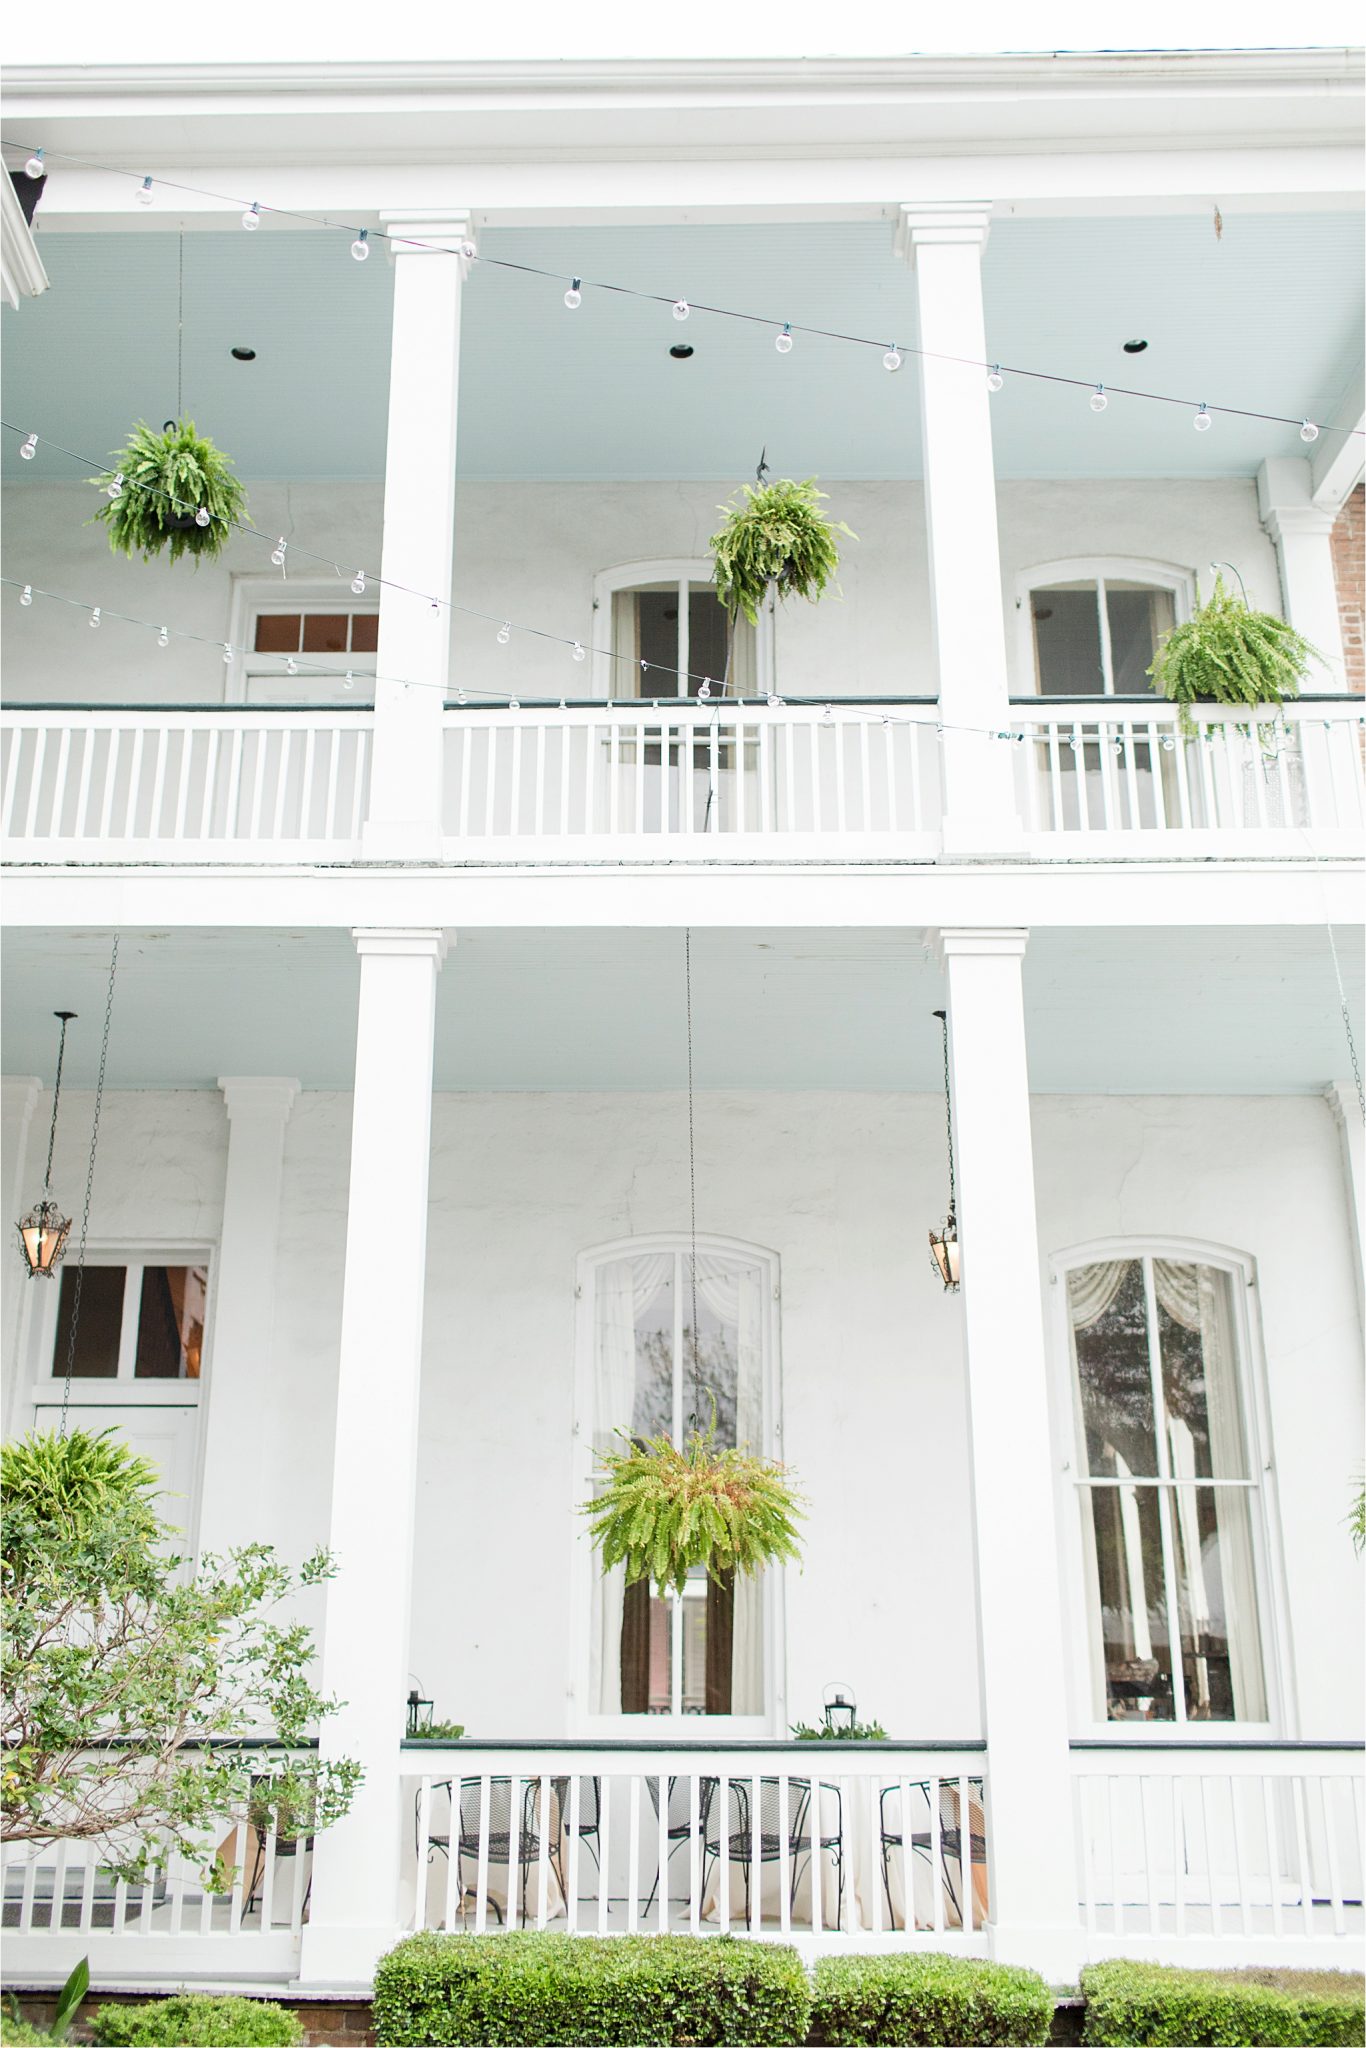 ezell house historic downtown mobile-alabama-wedding venue-drapping lights